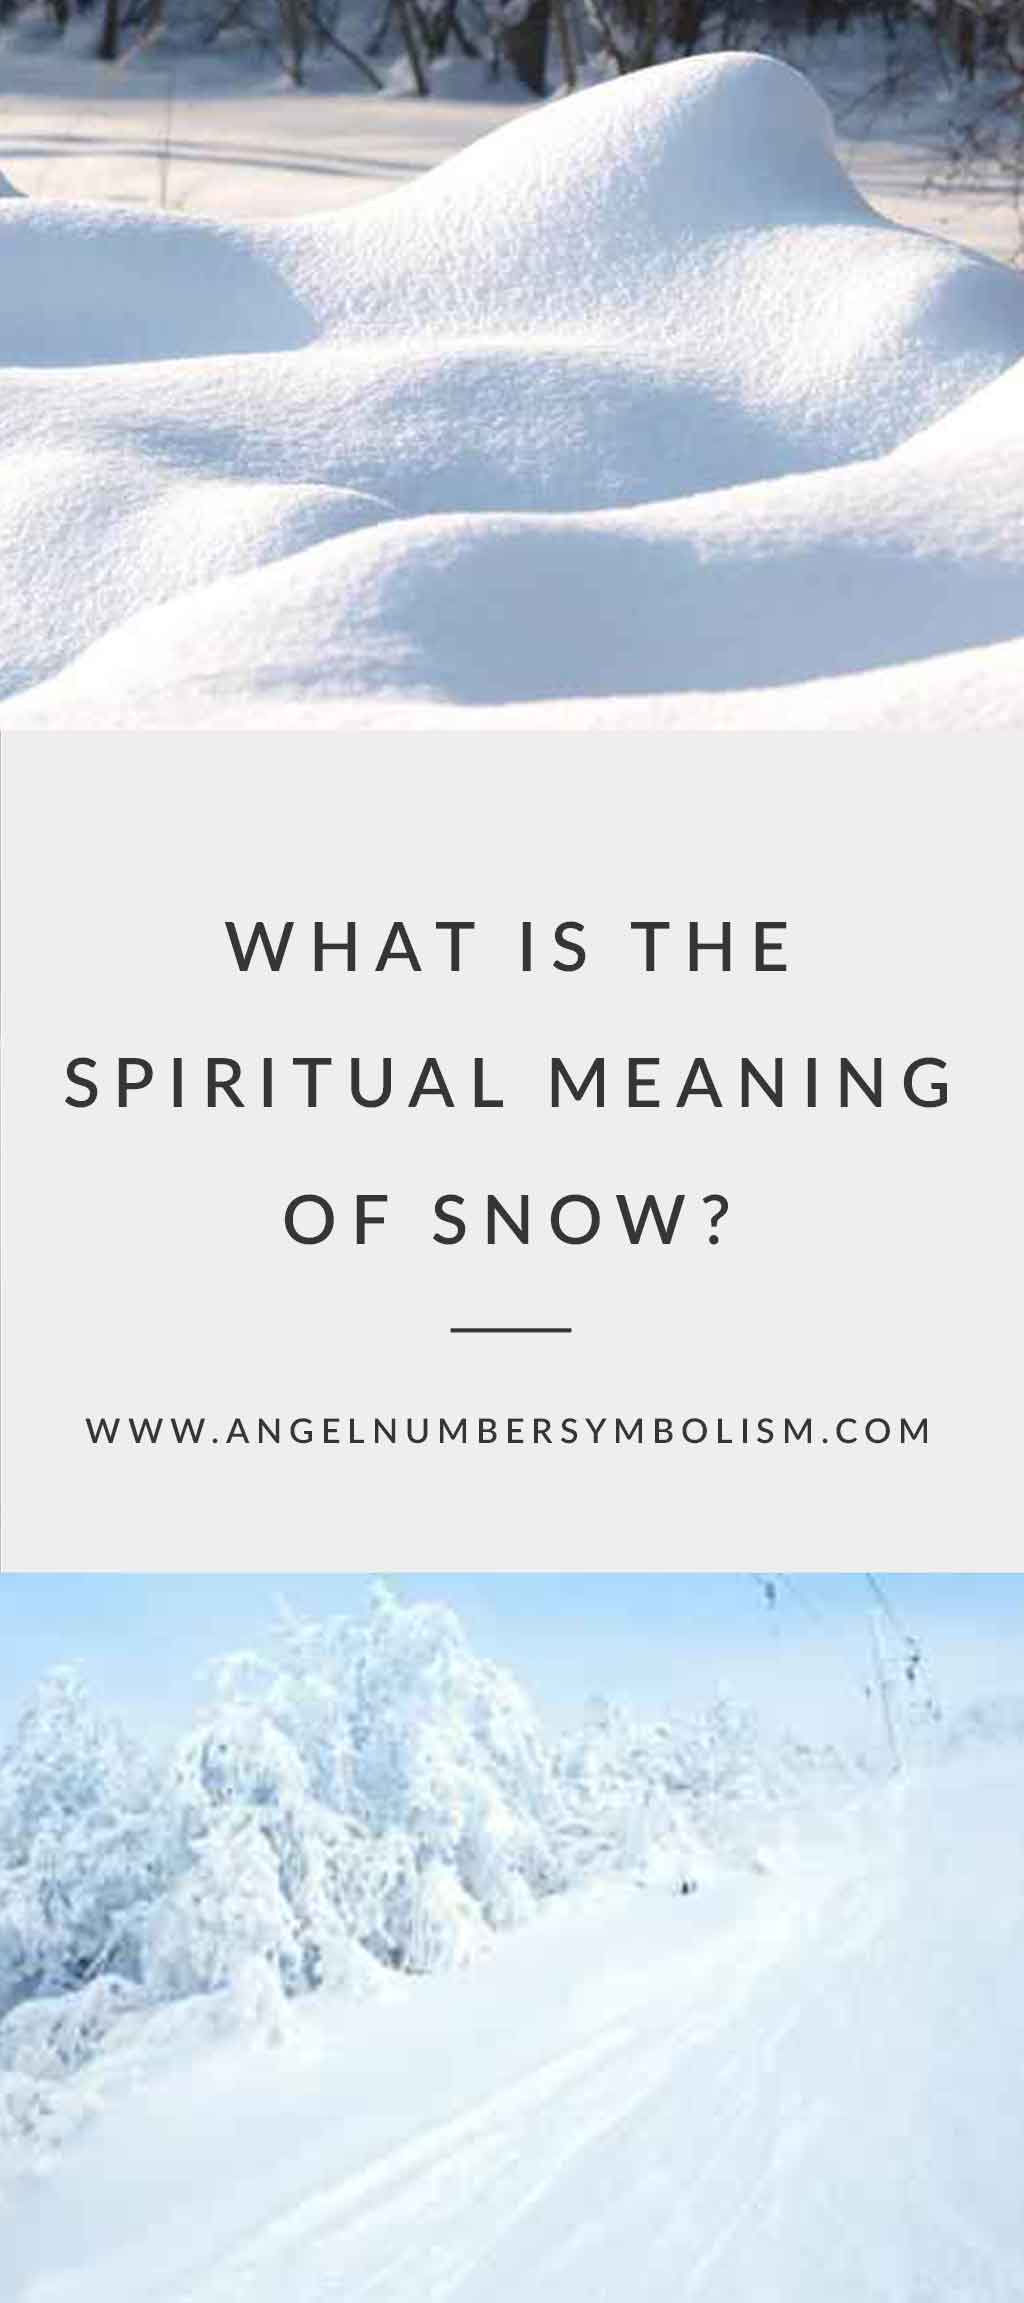 What Is the Spiritual Meaning of Snow